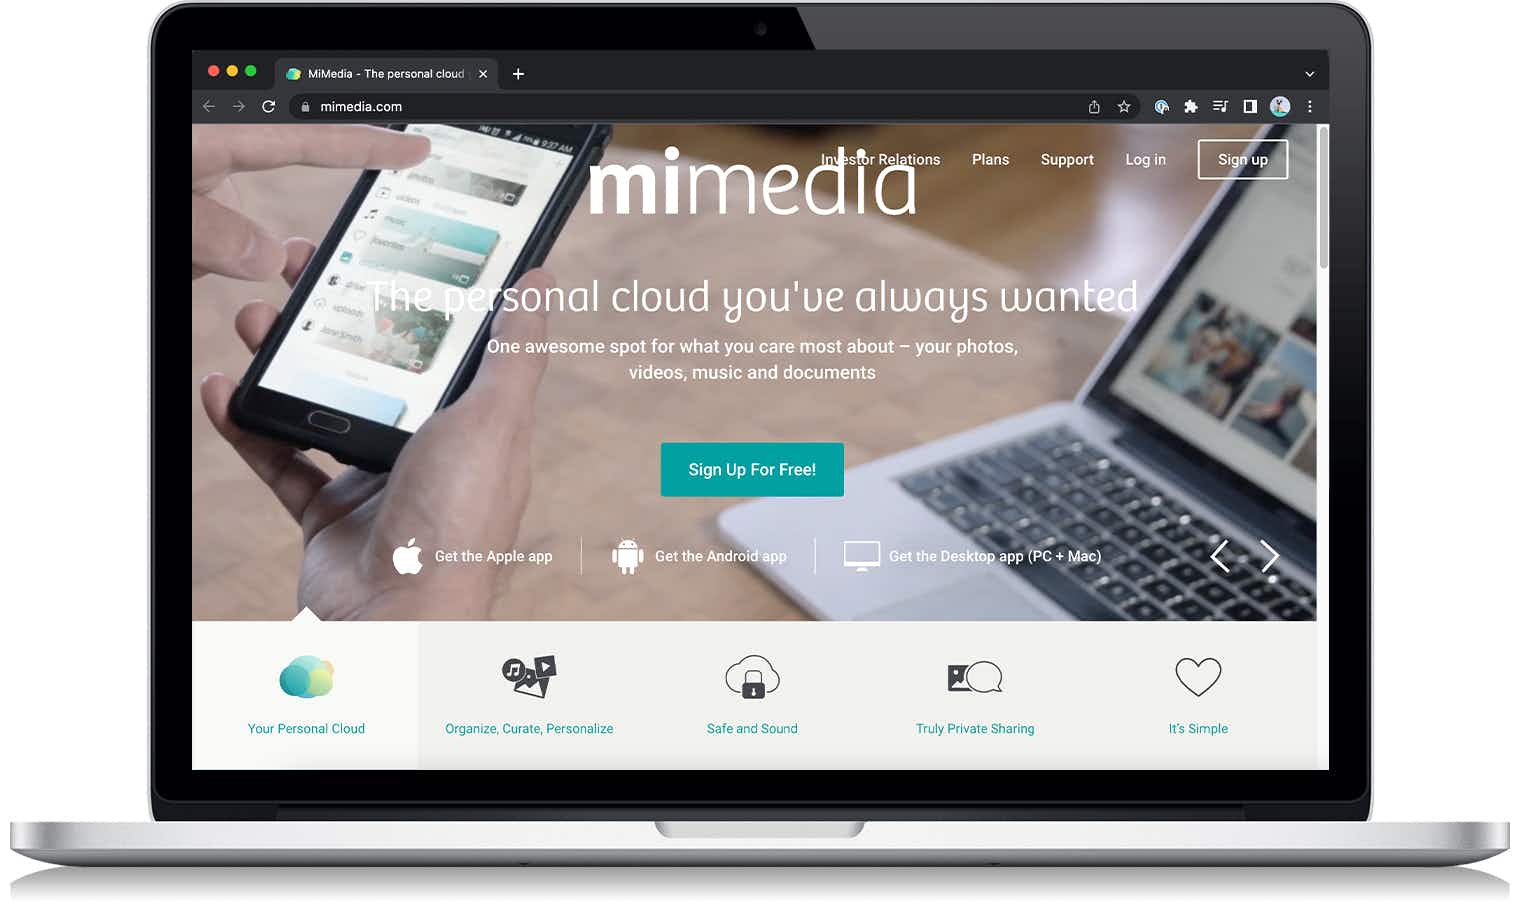 The Mimedia cloud storage website on a laptop